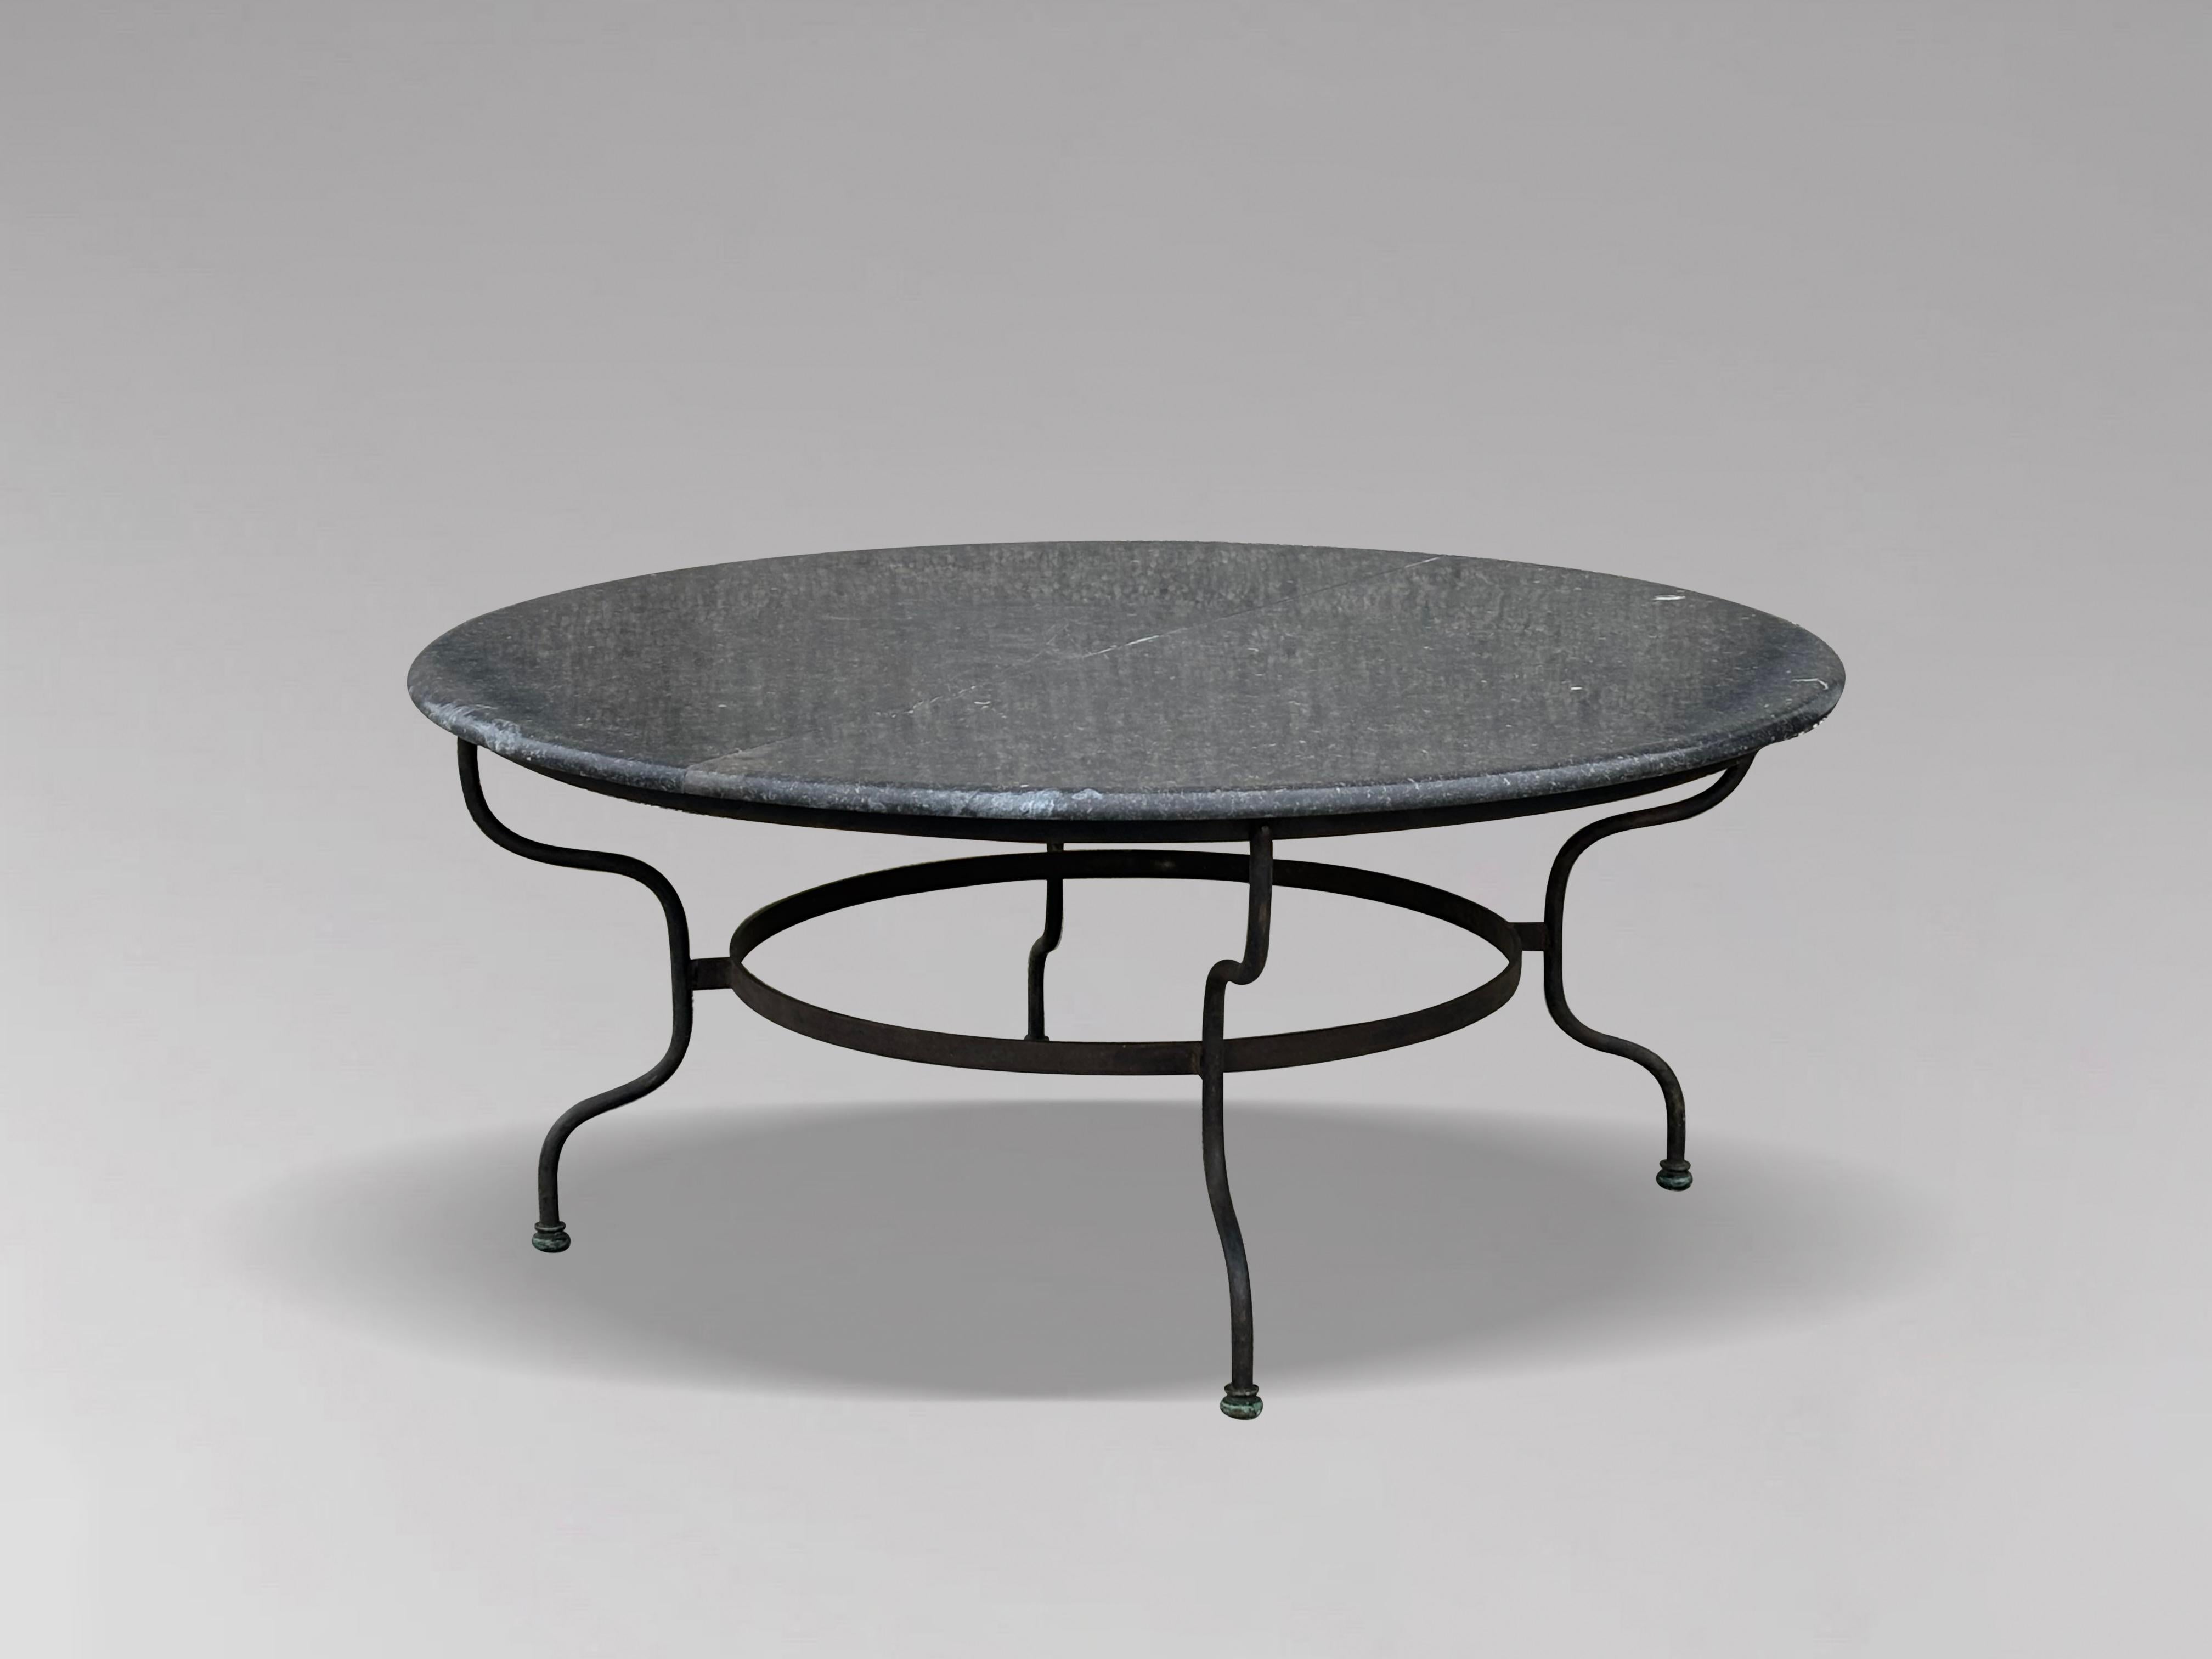 An unusually large and very elegant French early 20th century garden patio dining table. Polished grey granite circular top above a wrought iron base with 4 turned shaped legs connected with a circular stretcher. The circular granite top is divided